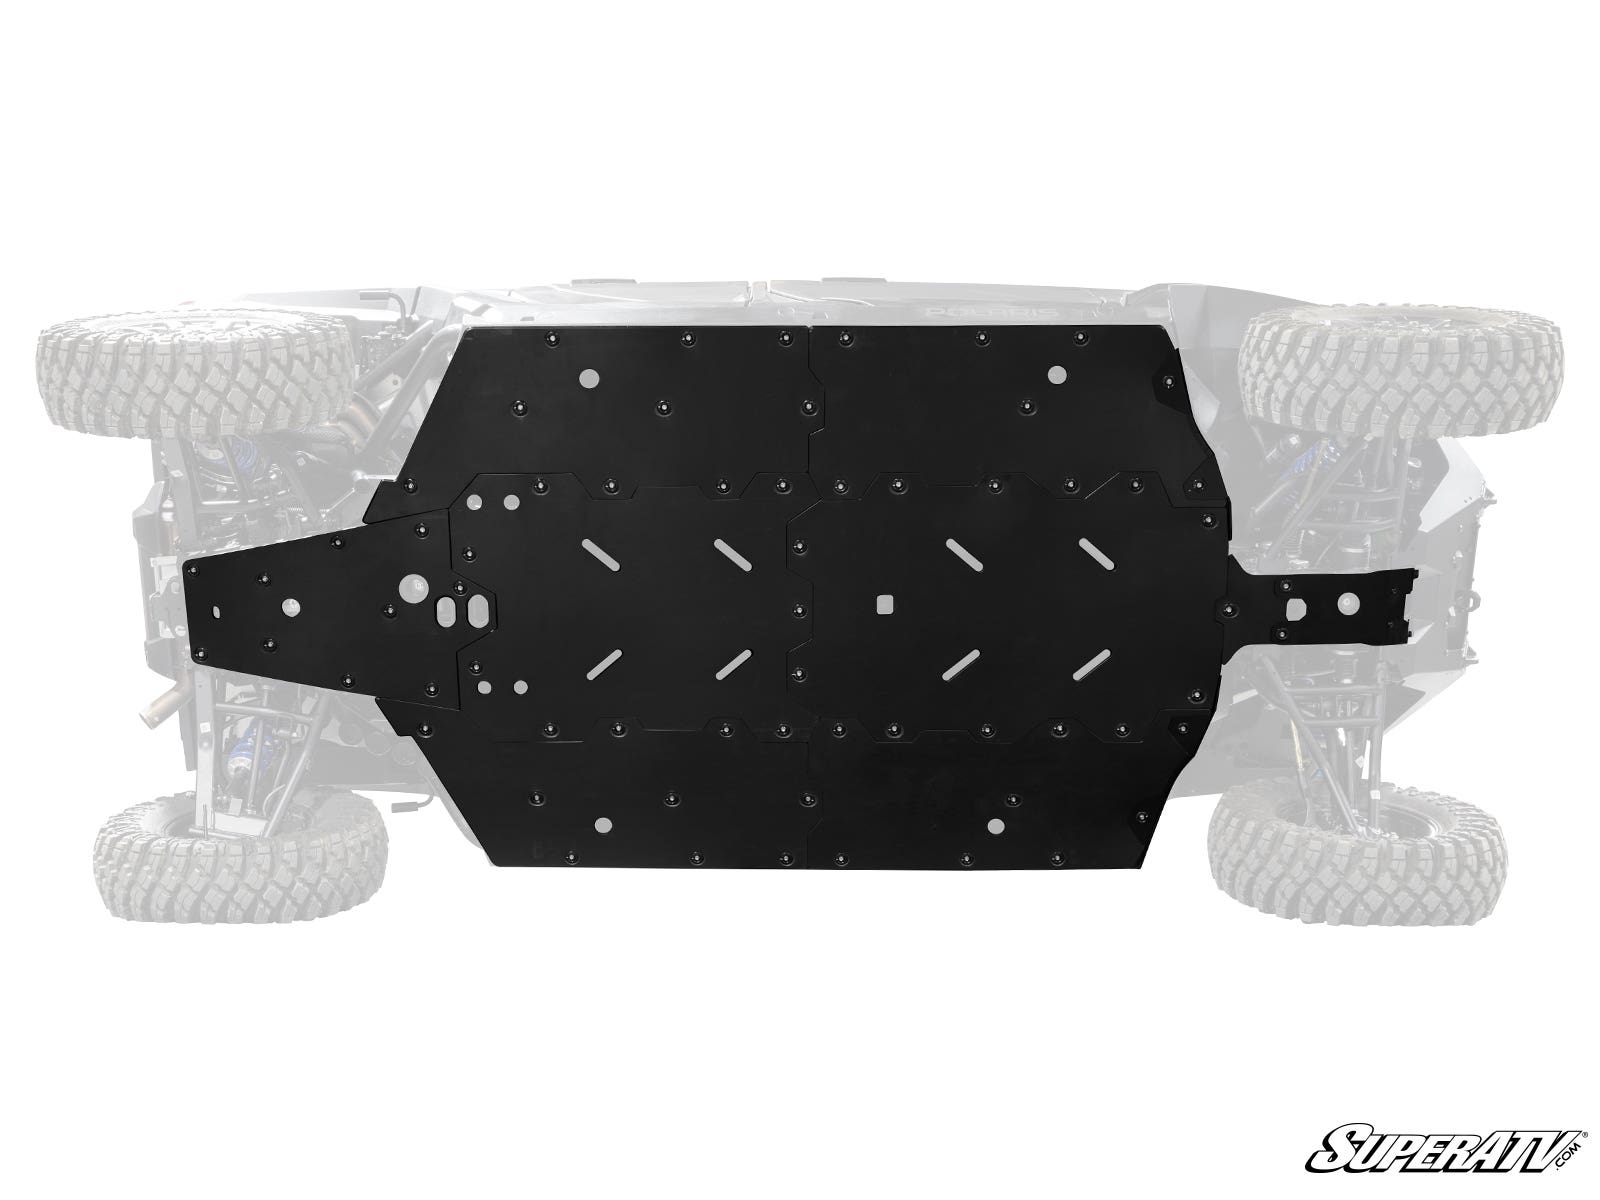 Polaris Xpedition 5 Full Skid Plate